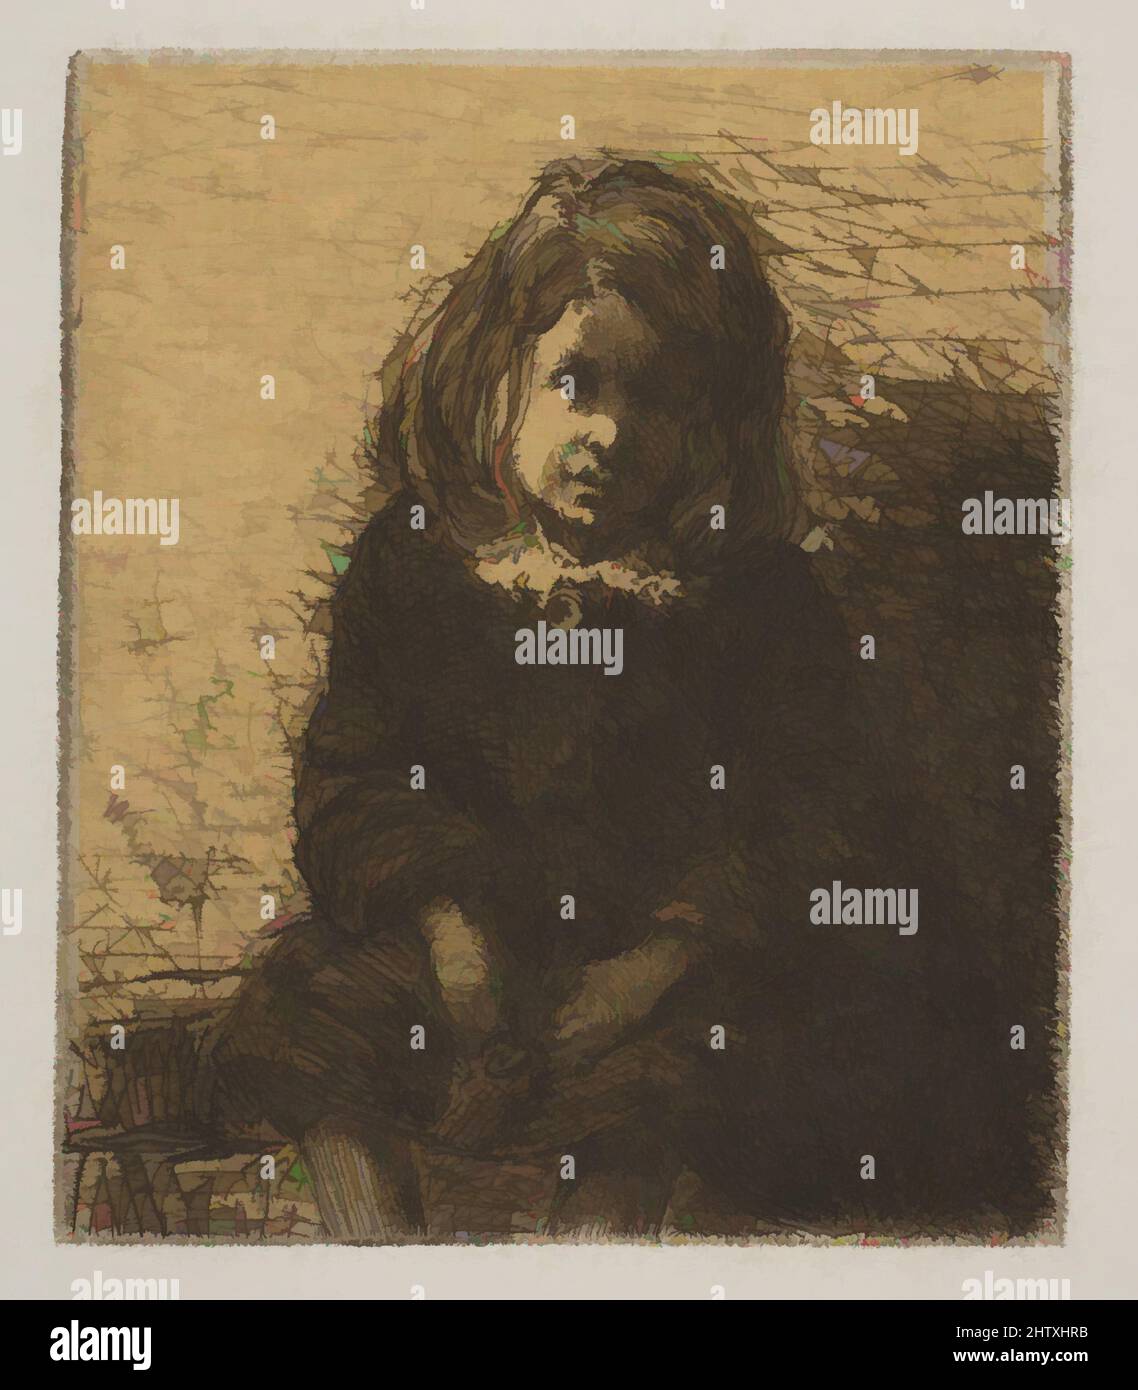 Art inspired by Little Arthur, 1857–58, Etching; fourth state of four (Glasgow); printed in black ink on tan (darkened) chine on white wove paper (chine collé), Plate: 2 5/16 x 1 15/16 in. (5.9 x 4.9 cm), Prints, James McNeill Whistler (American, Lowell, Massachusetts 1834–1903 London, Classic works modernized by Artotop with a splash of modernity. Shapes, color and value, eye-catching visual impact on art. Emotions through freedom of artworks in a contemporary way. A timeless message pursuing a wildly creative new direction. Artists turning to the digital medium and creating the Artotop NFT Stock Photo